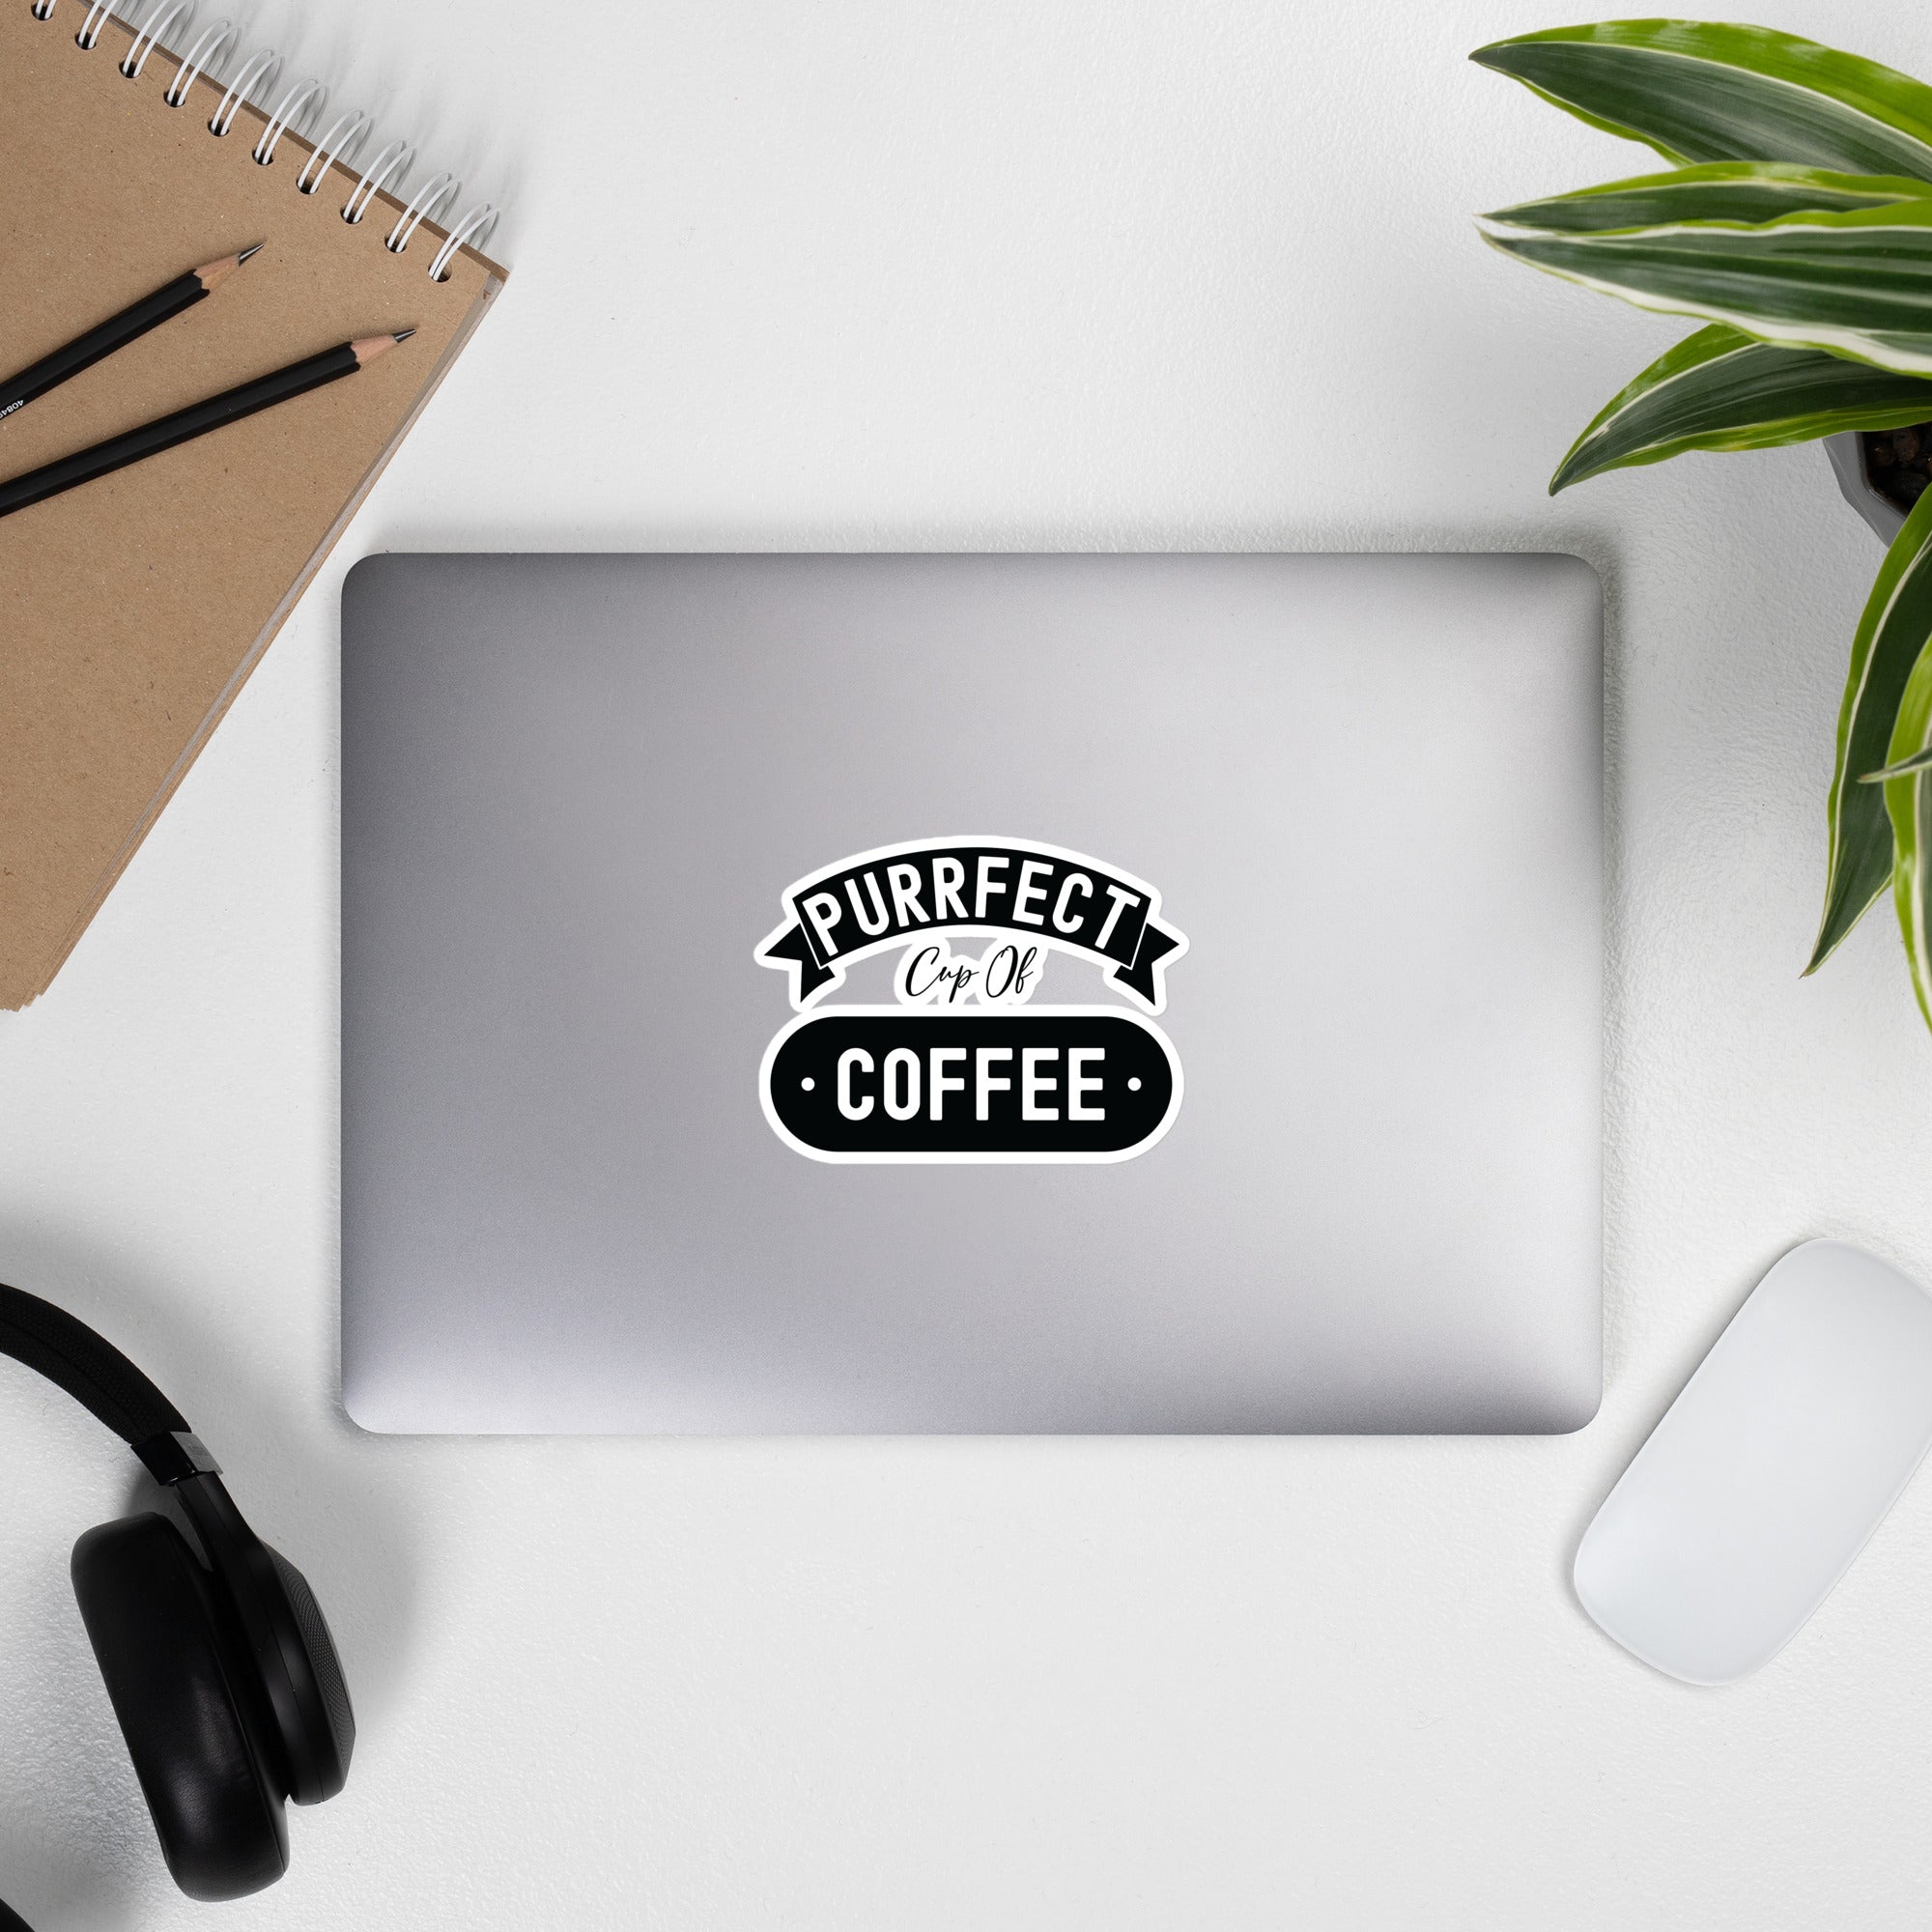 Bubble-free stickers | Purrfect cup of coffee